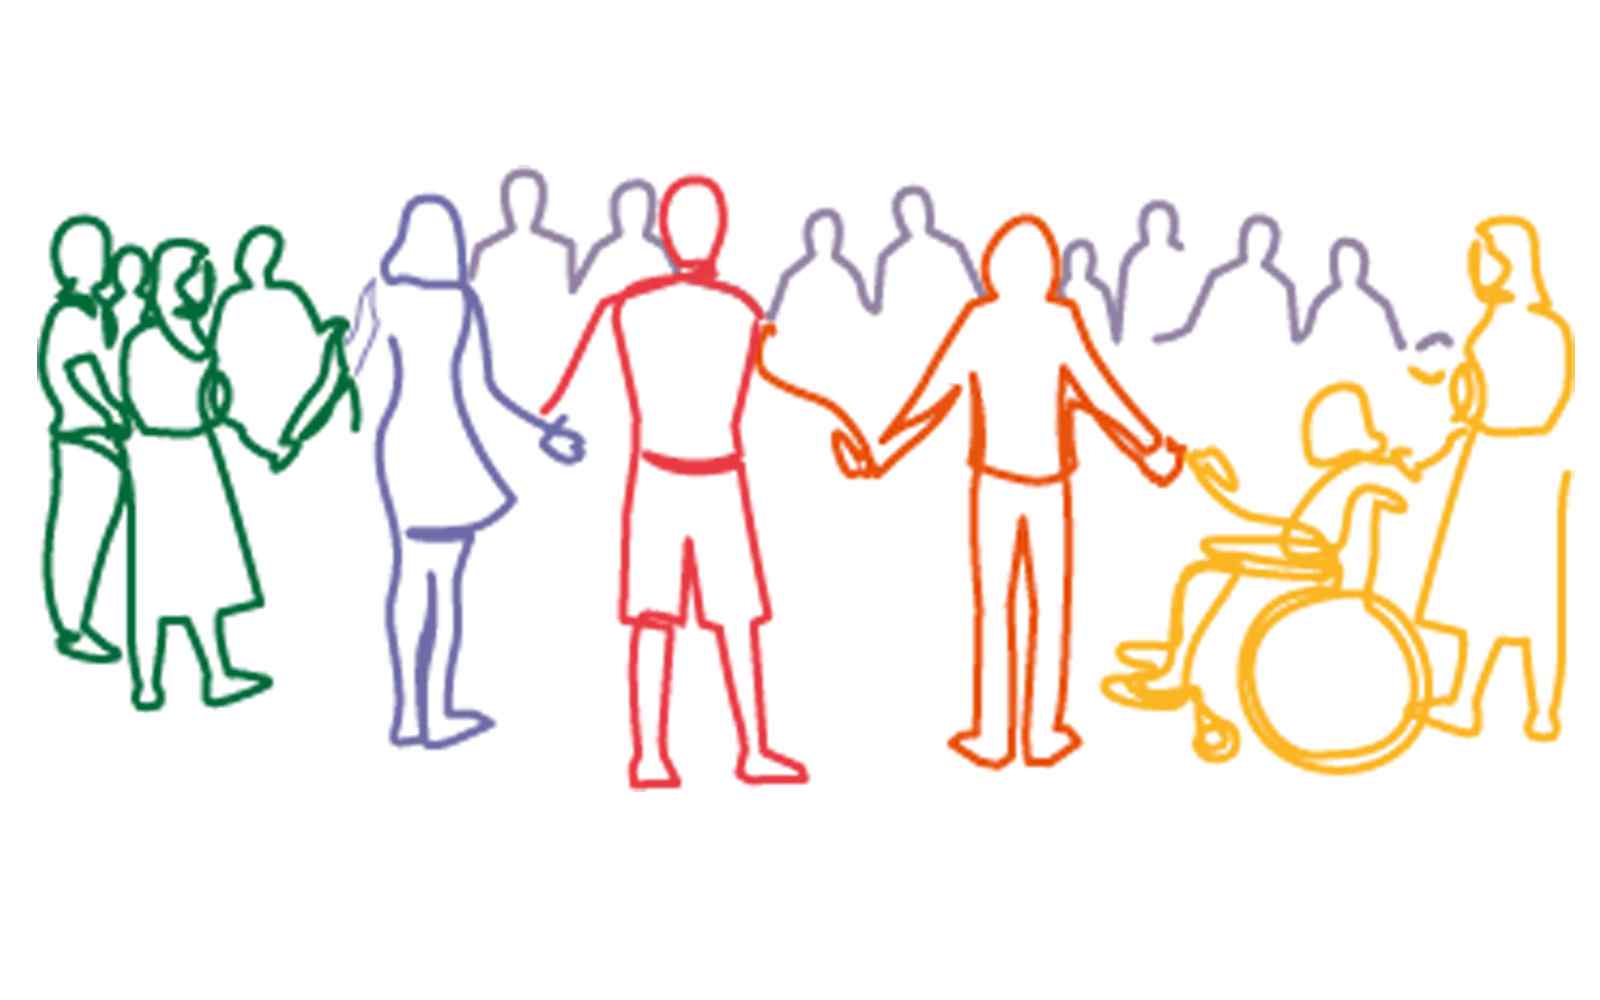 Line drawing of people in circle holding hands 